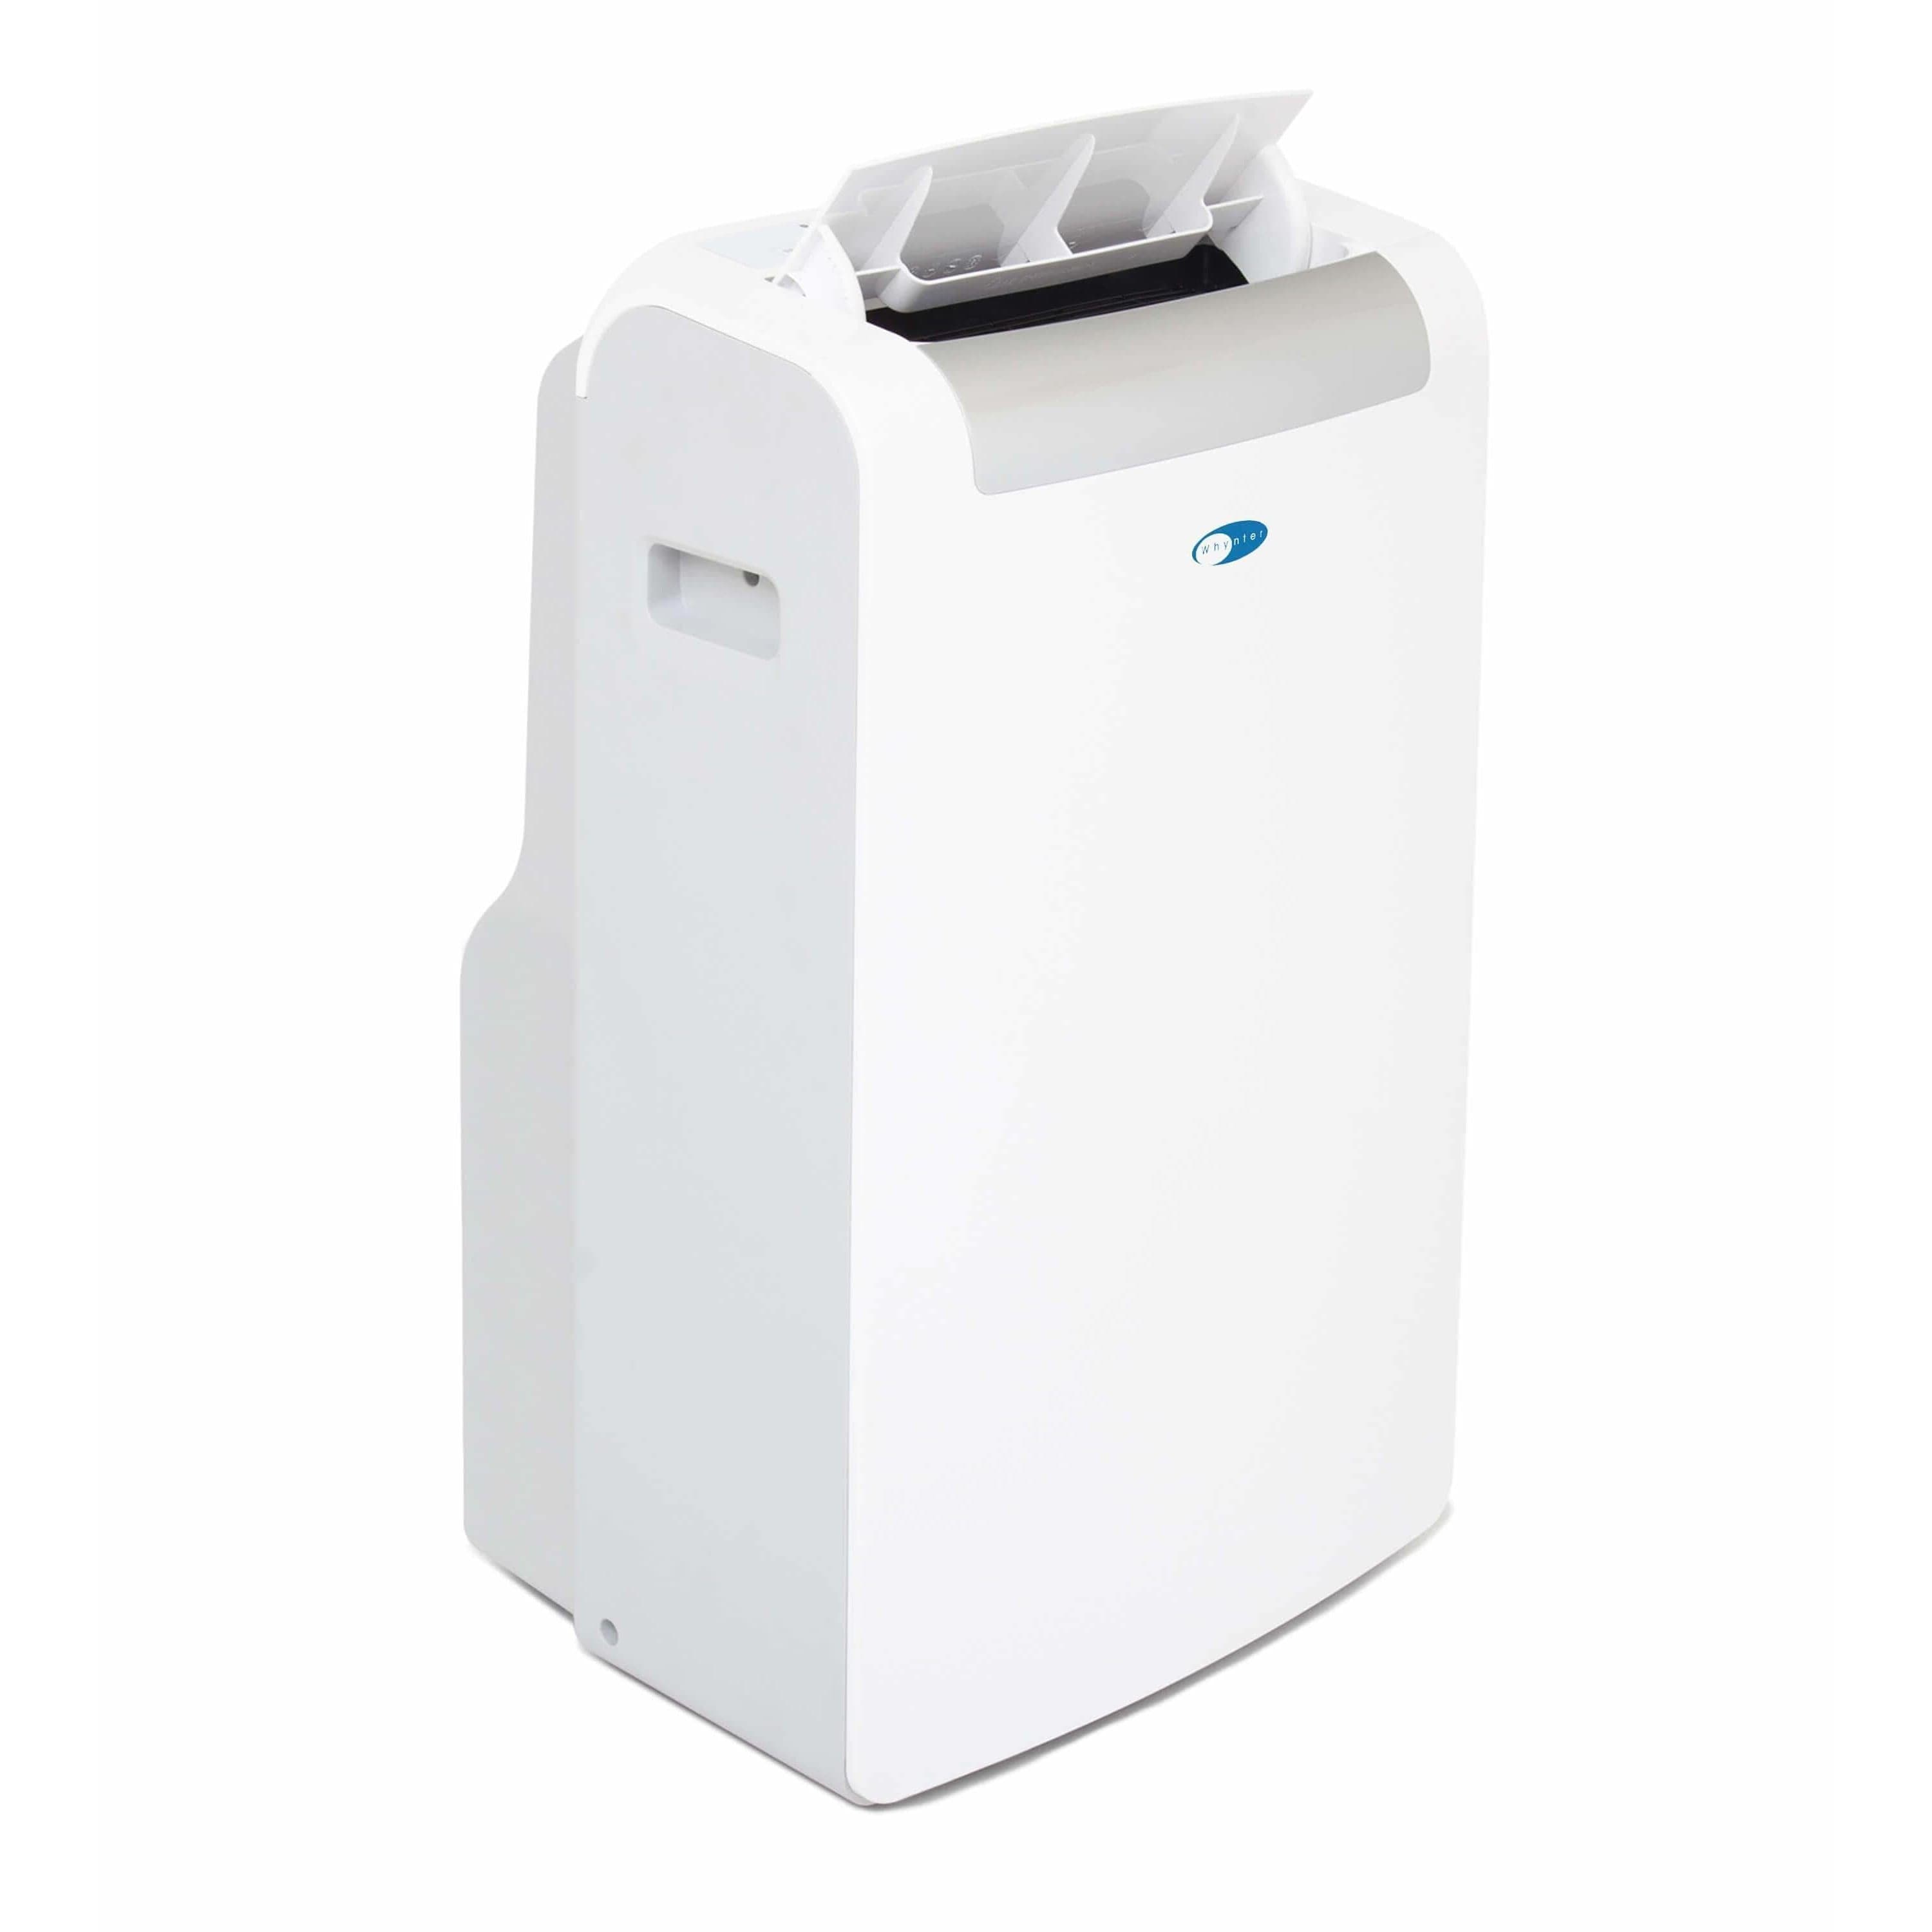 Whynter Portable Air Conditioner with 3M Silvershield Filter ARC-148MS Portable Air Conditioners ARC-148MS Luxury Appliances Direct